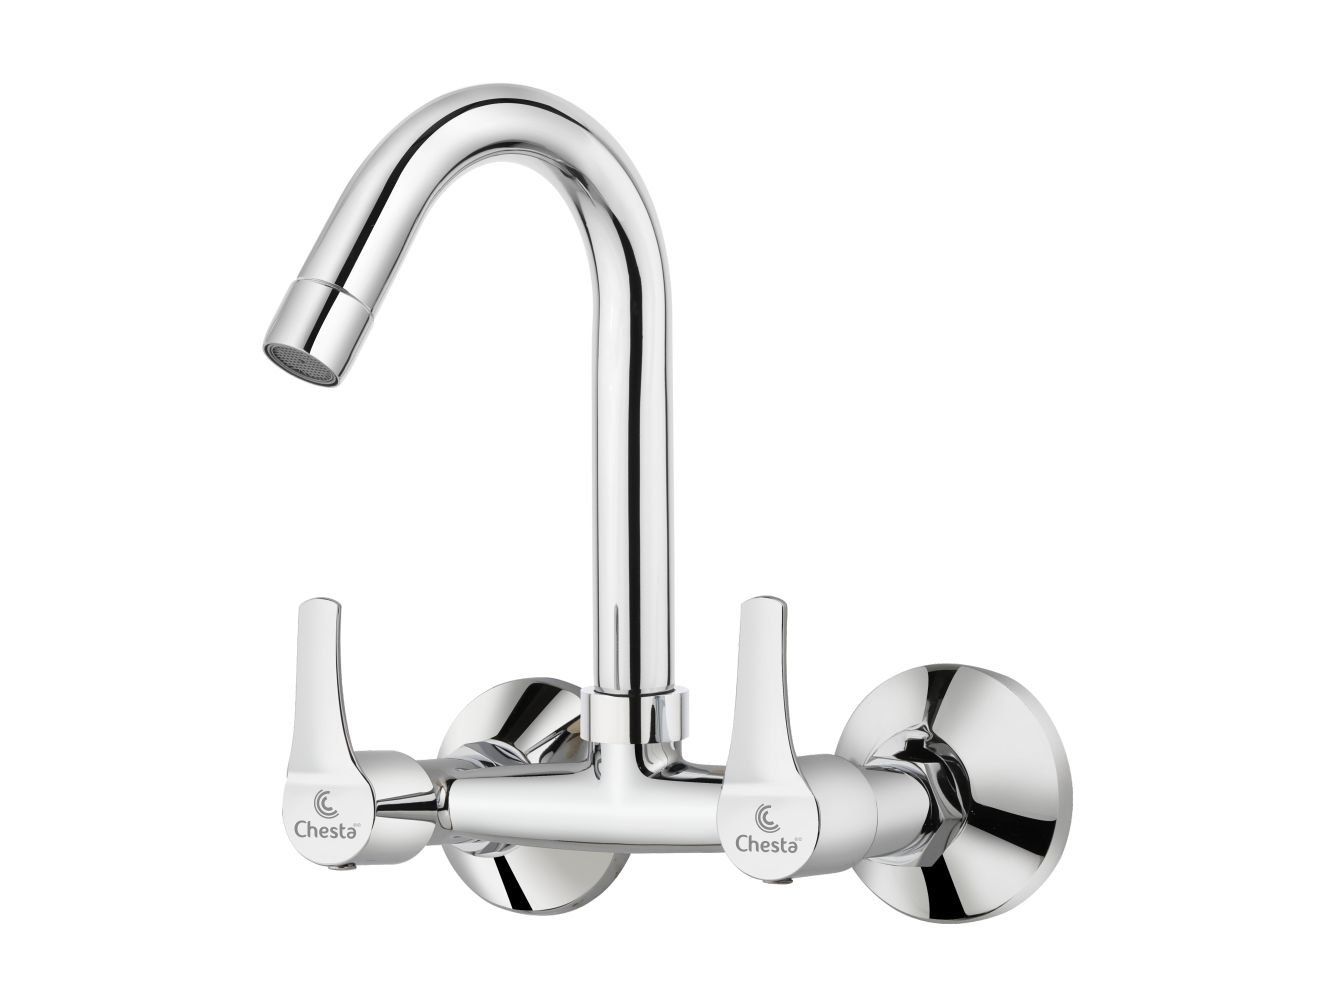 ST - 1022 - Sink Mixer at Chesta Bath Fittings